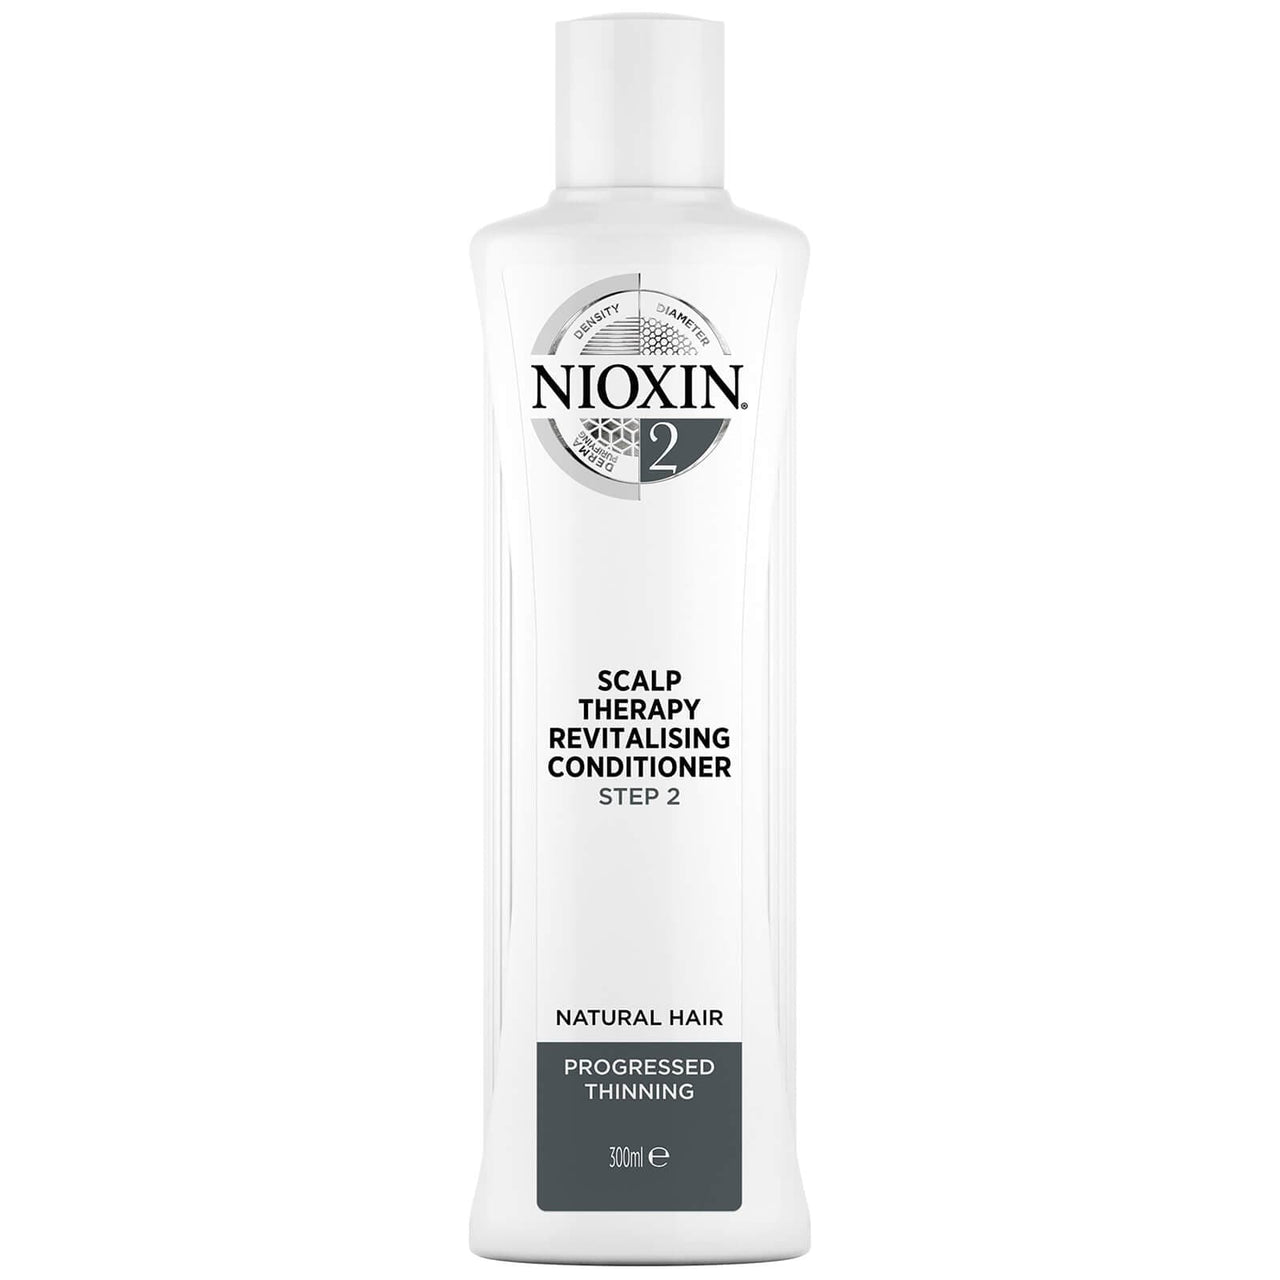 NIOXIN 3-Part System 2 Scalp Therapy Revitalising Conditioner for Natural Hair with Progressed Thinning